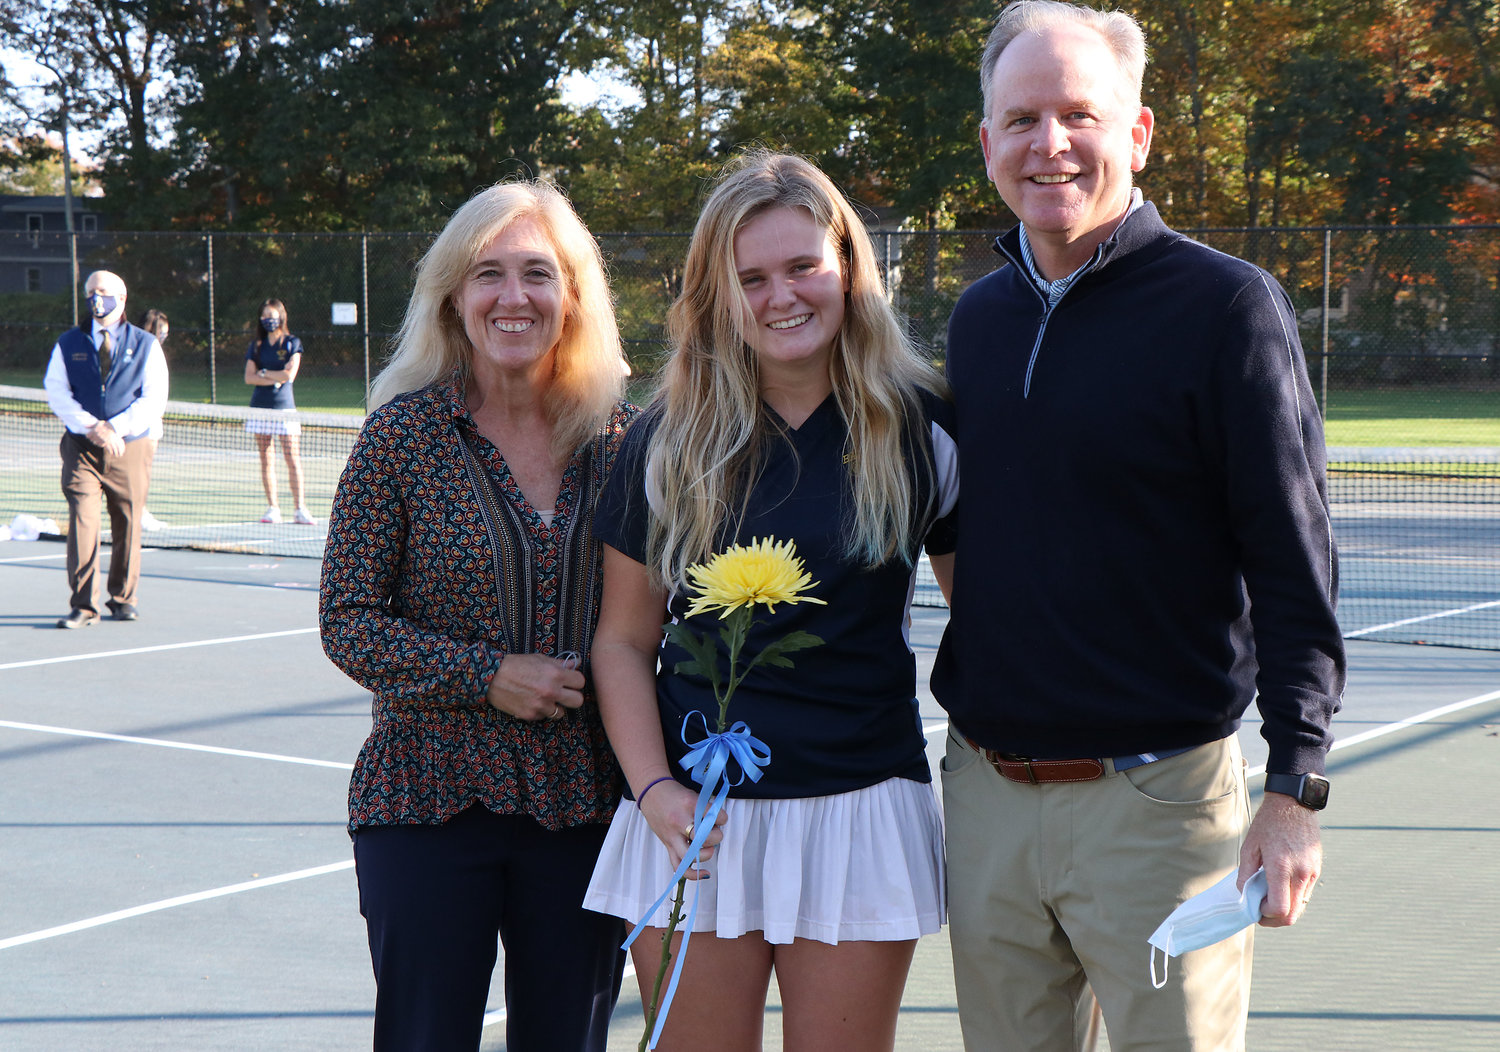 Caroline Maher brings a flower and poses with parents David and Pam Maher during a short senior ceremony at the courts on Friday afternoon.